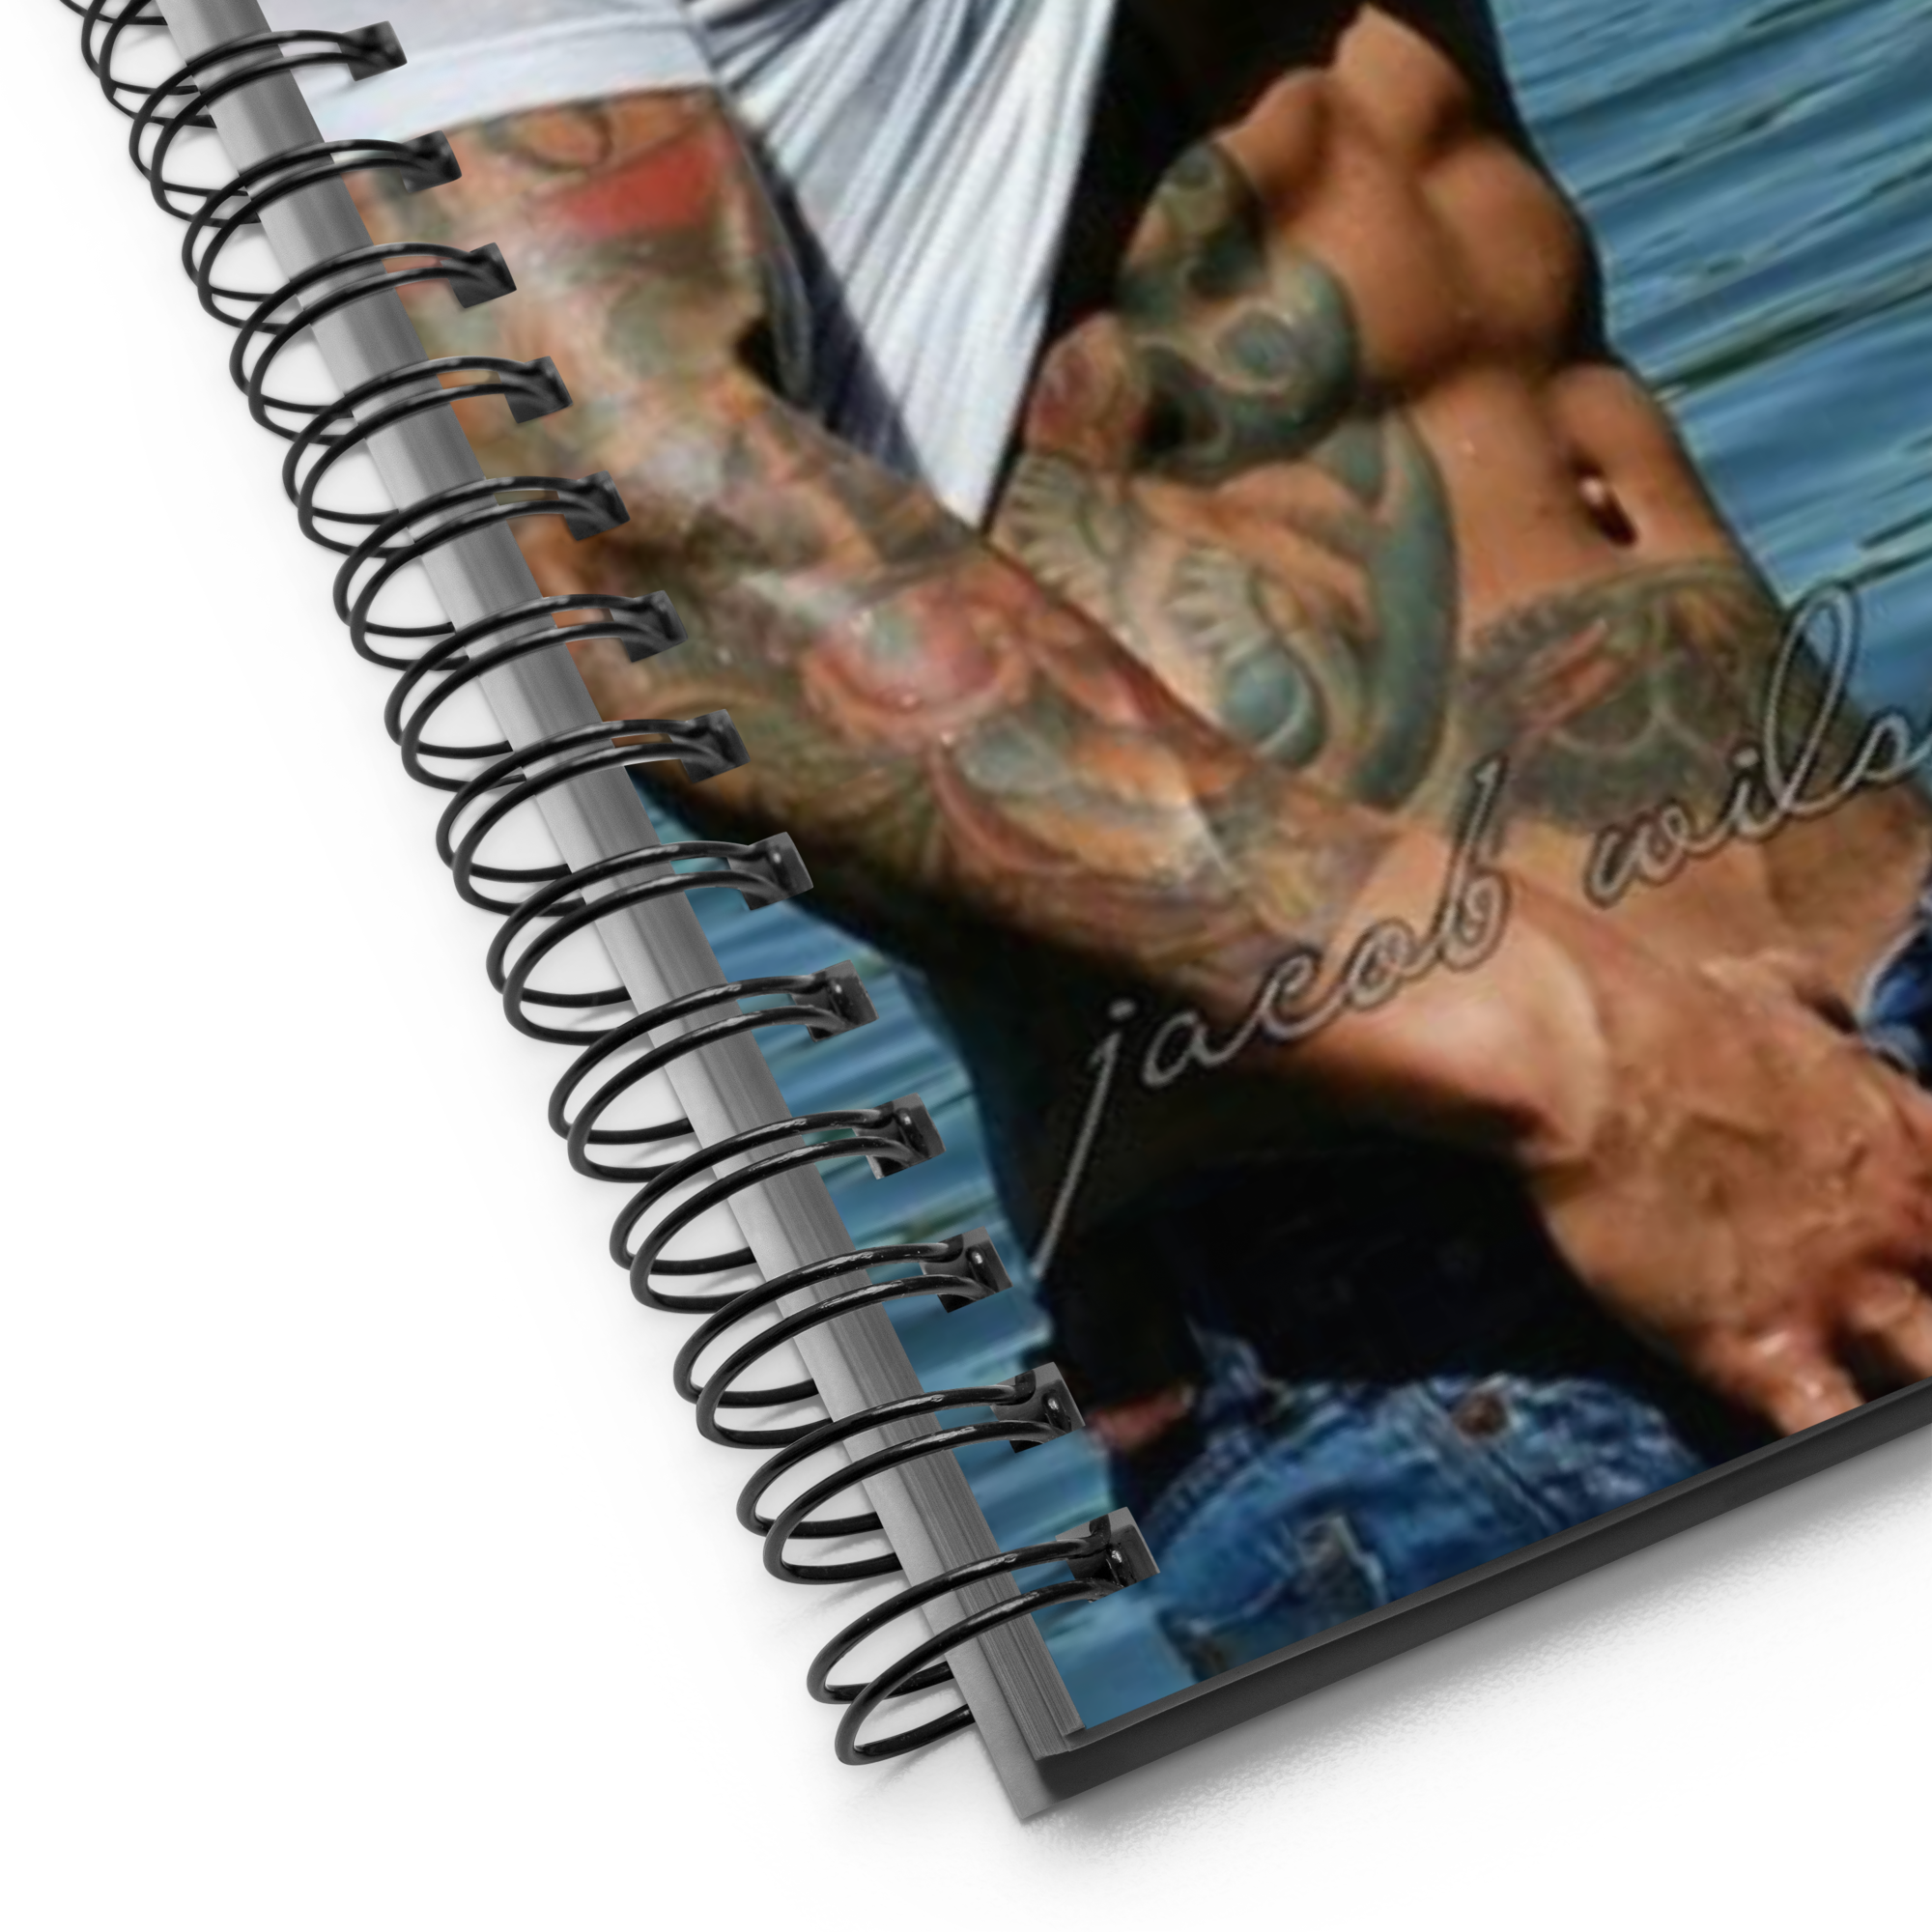 Jake in a Lake Notebook